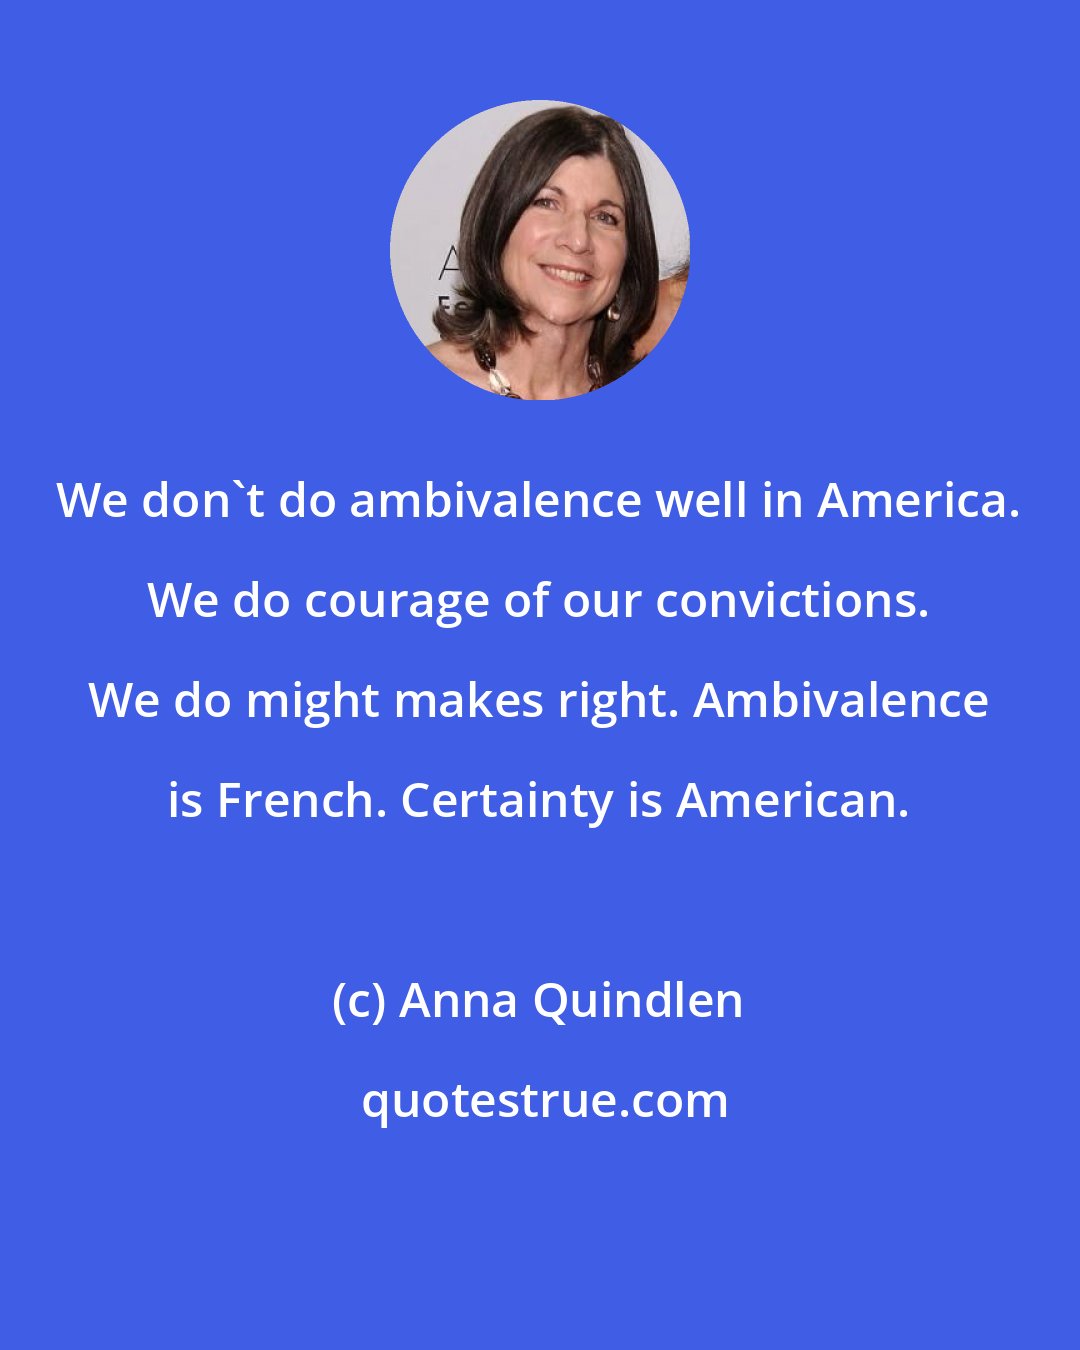 Anna Quindlen: We don't do ambivalence well in America. We do courage of our convictions. We do might makes right. Ambivalence is French. Certainty is American.